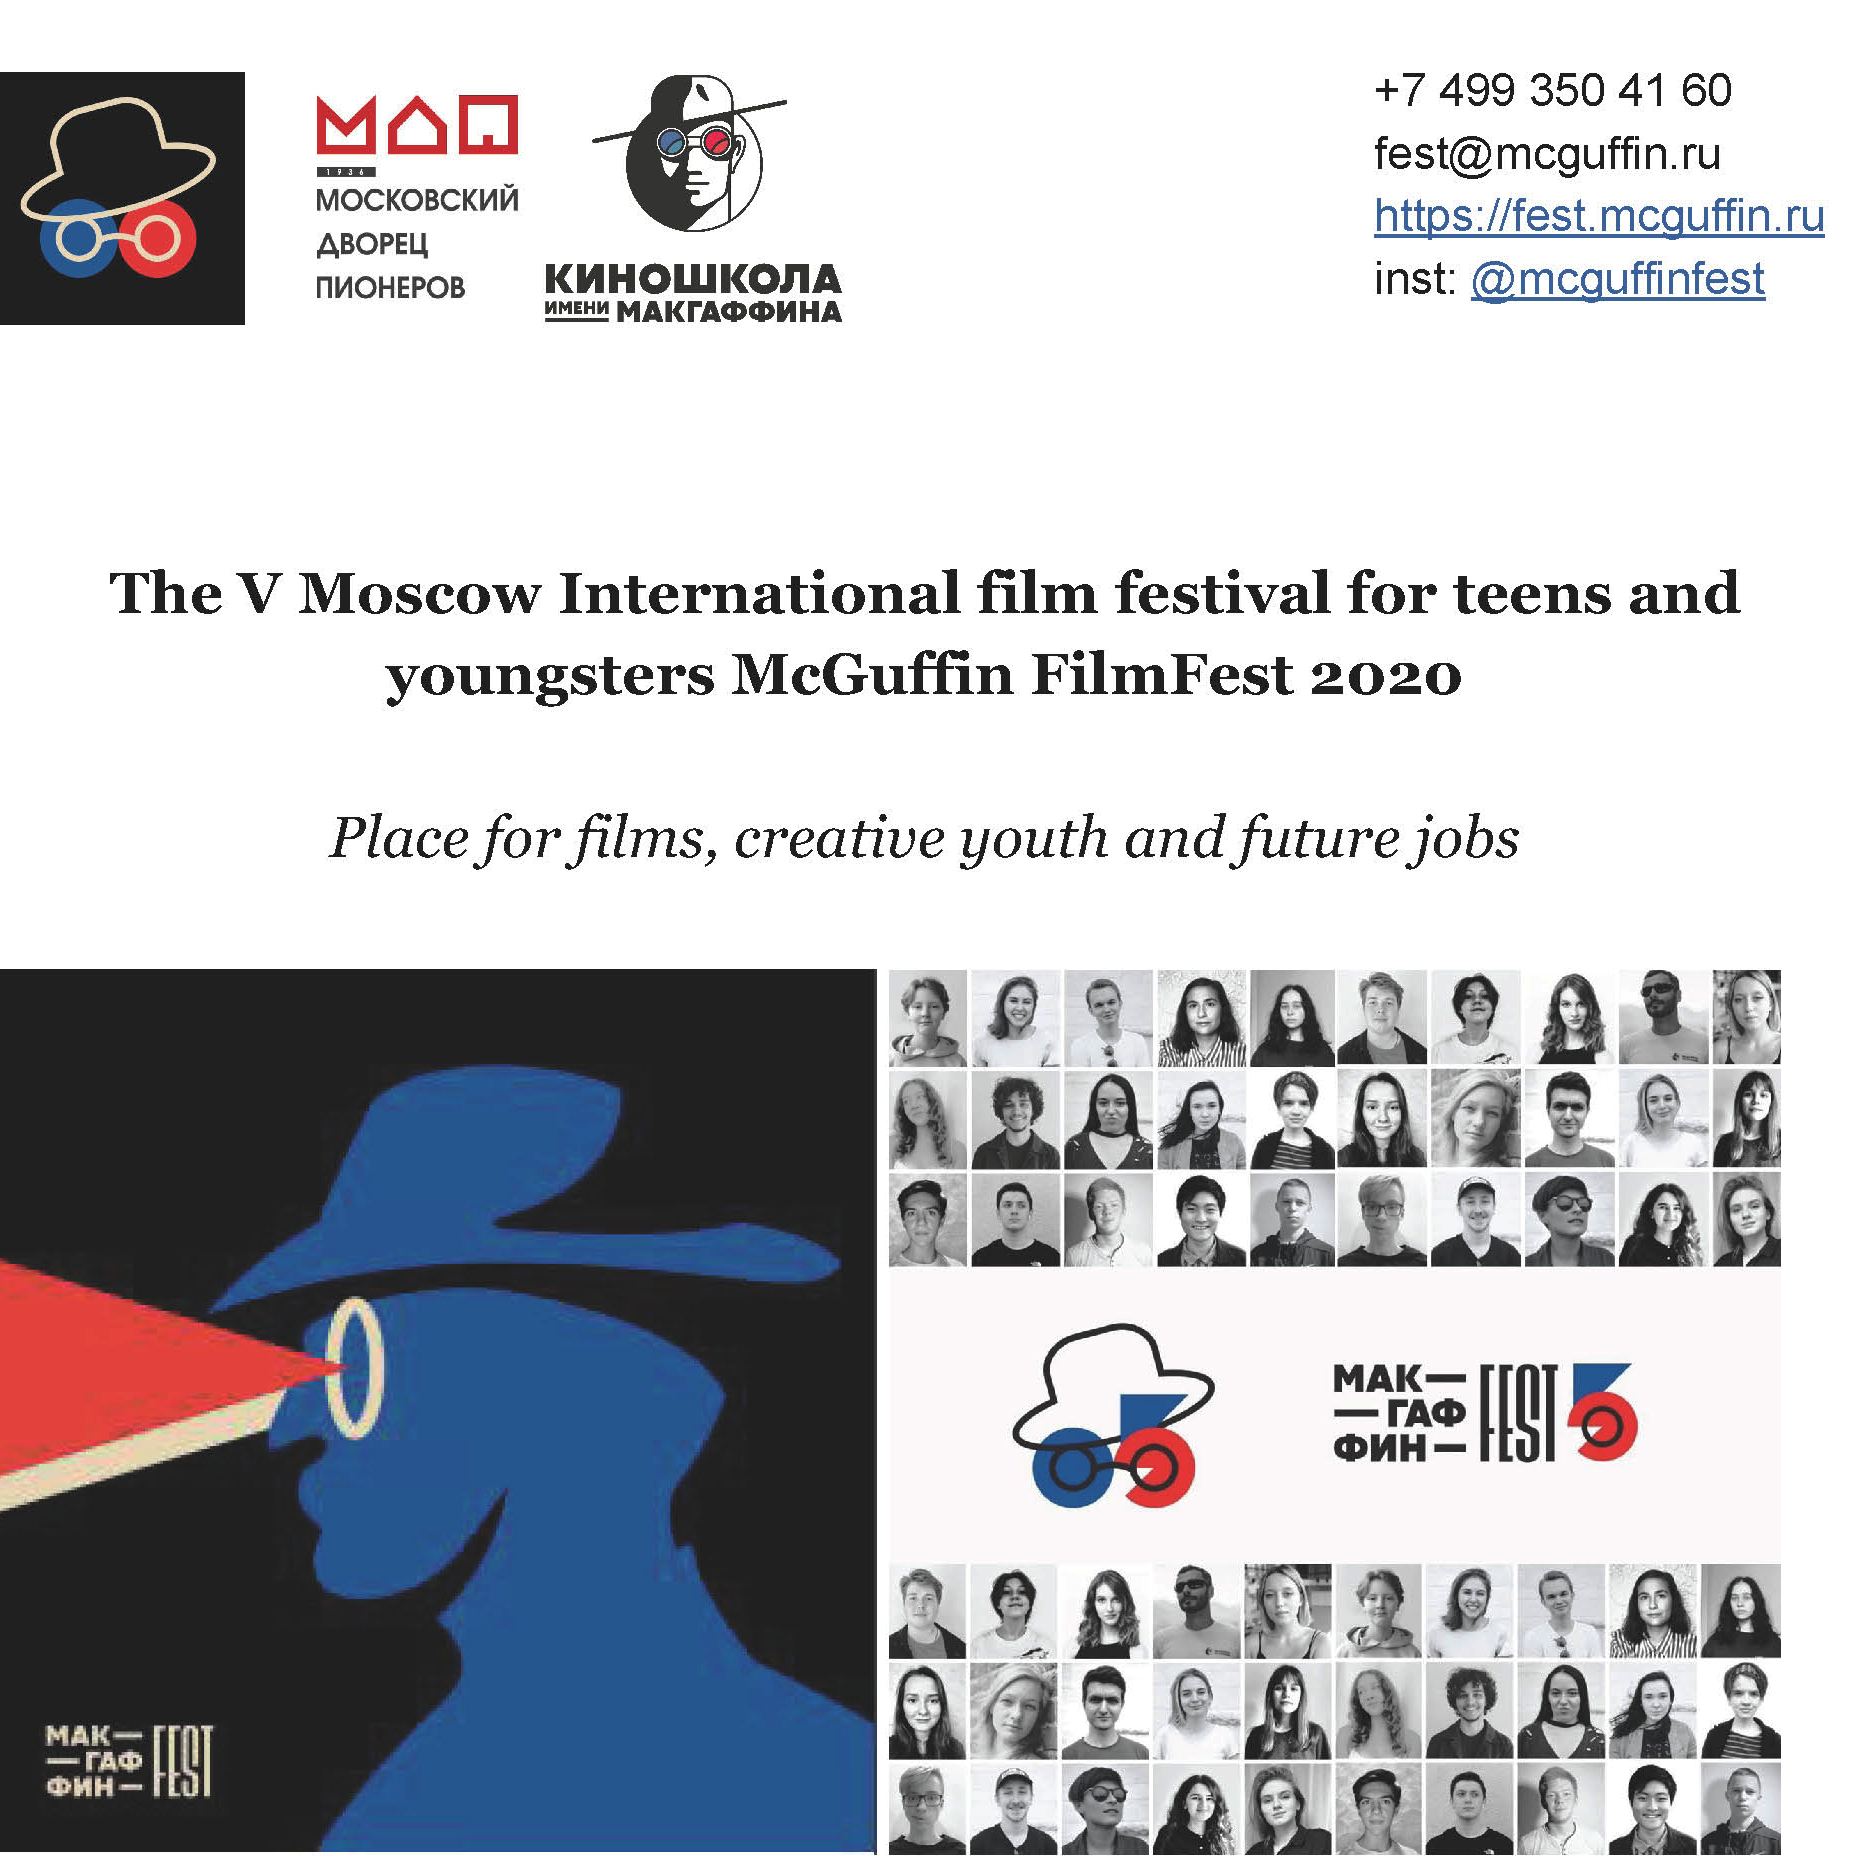 The V Moscow International film festival for teens and youngsters Page 01